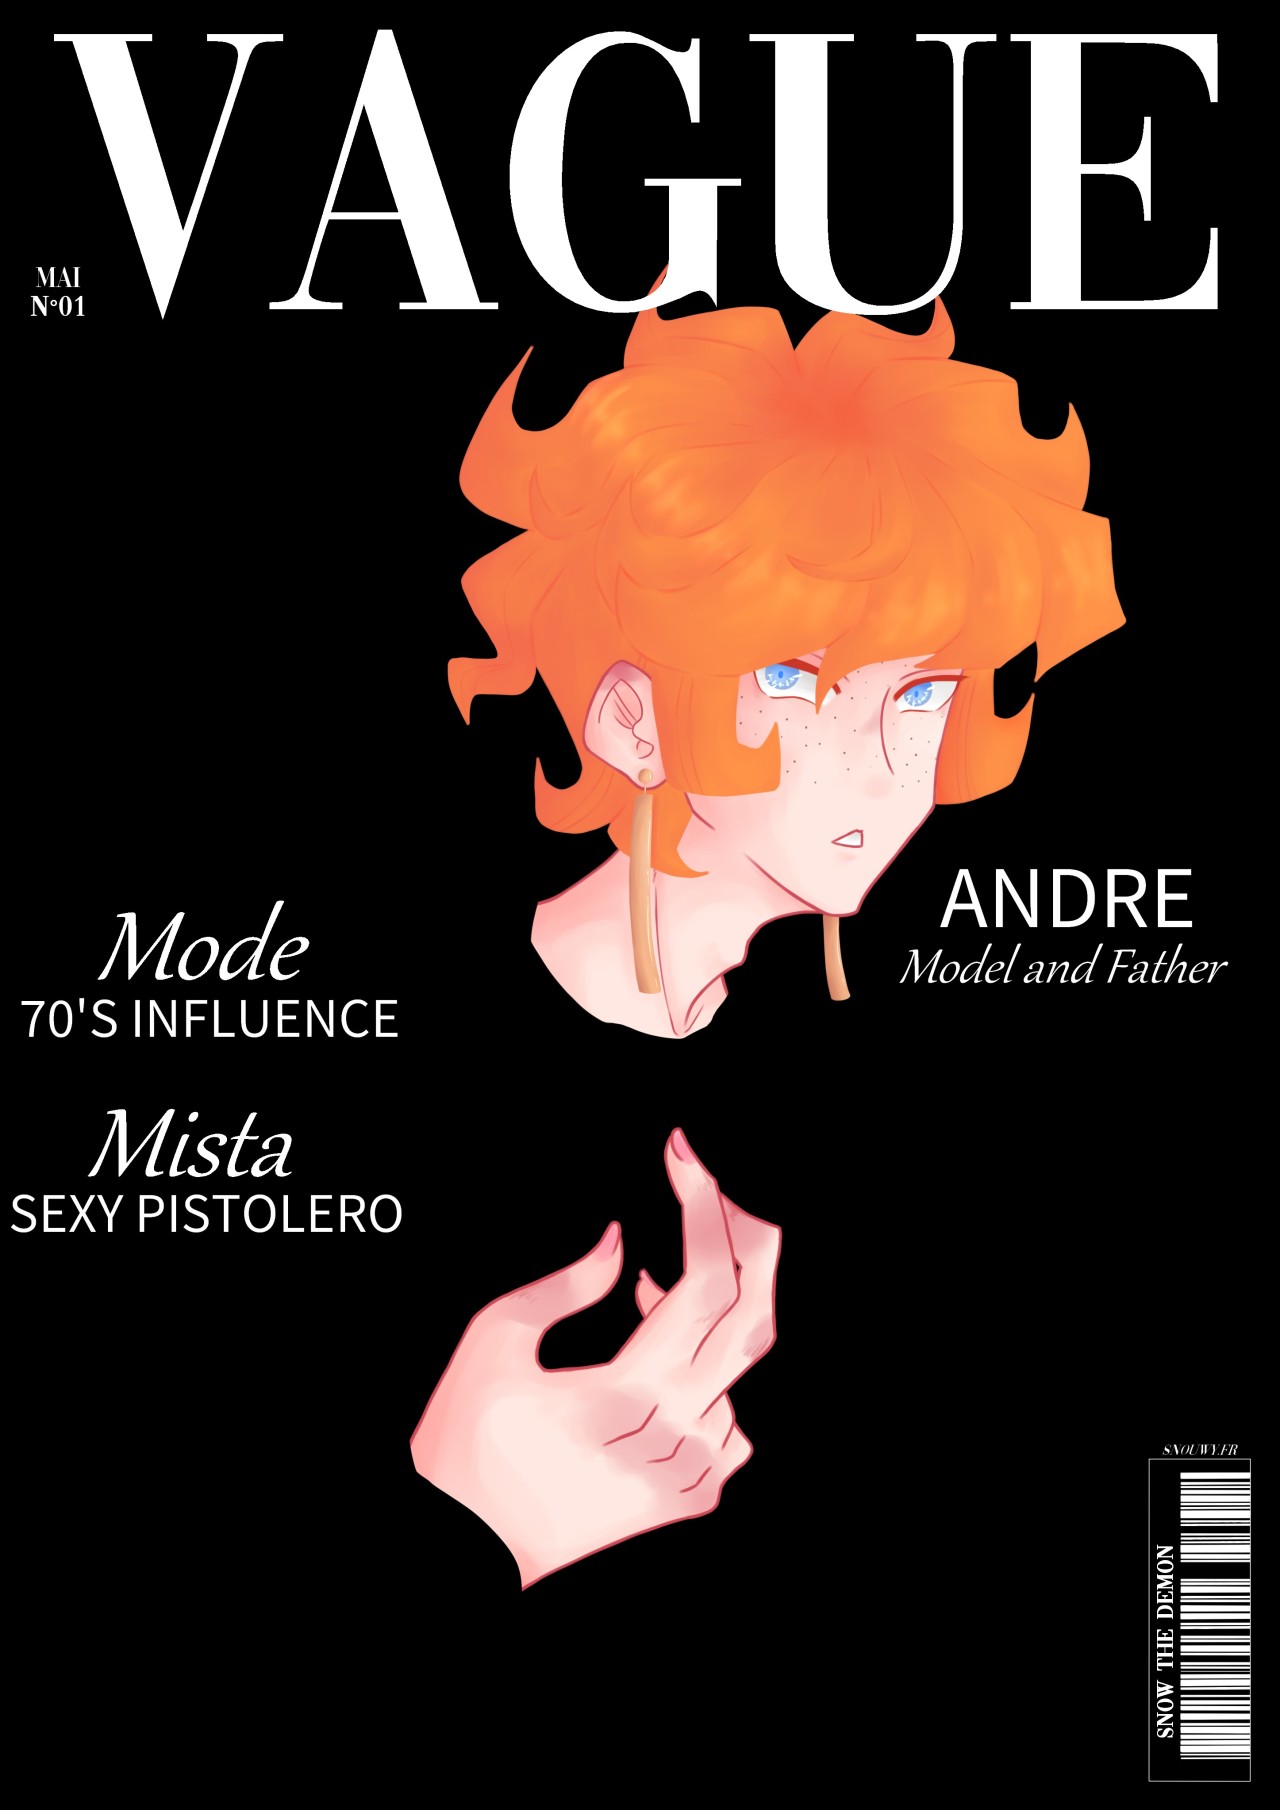 I was always obsessed with fashion so I decided to make fake magazine covers every month. Maybe someday Ill work for a real magazine 🤔✨✨ #fake magazine cover #vogue#jojo reference#fashion#magazine#vague#digital art#Digital Illustration#original illustration#original art#original character